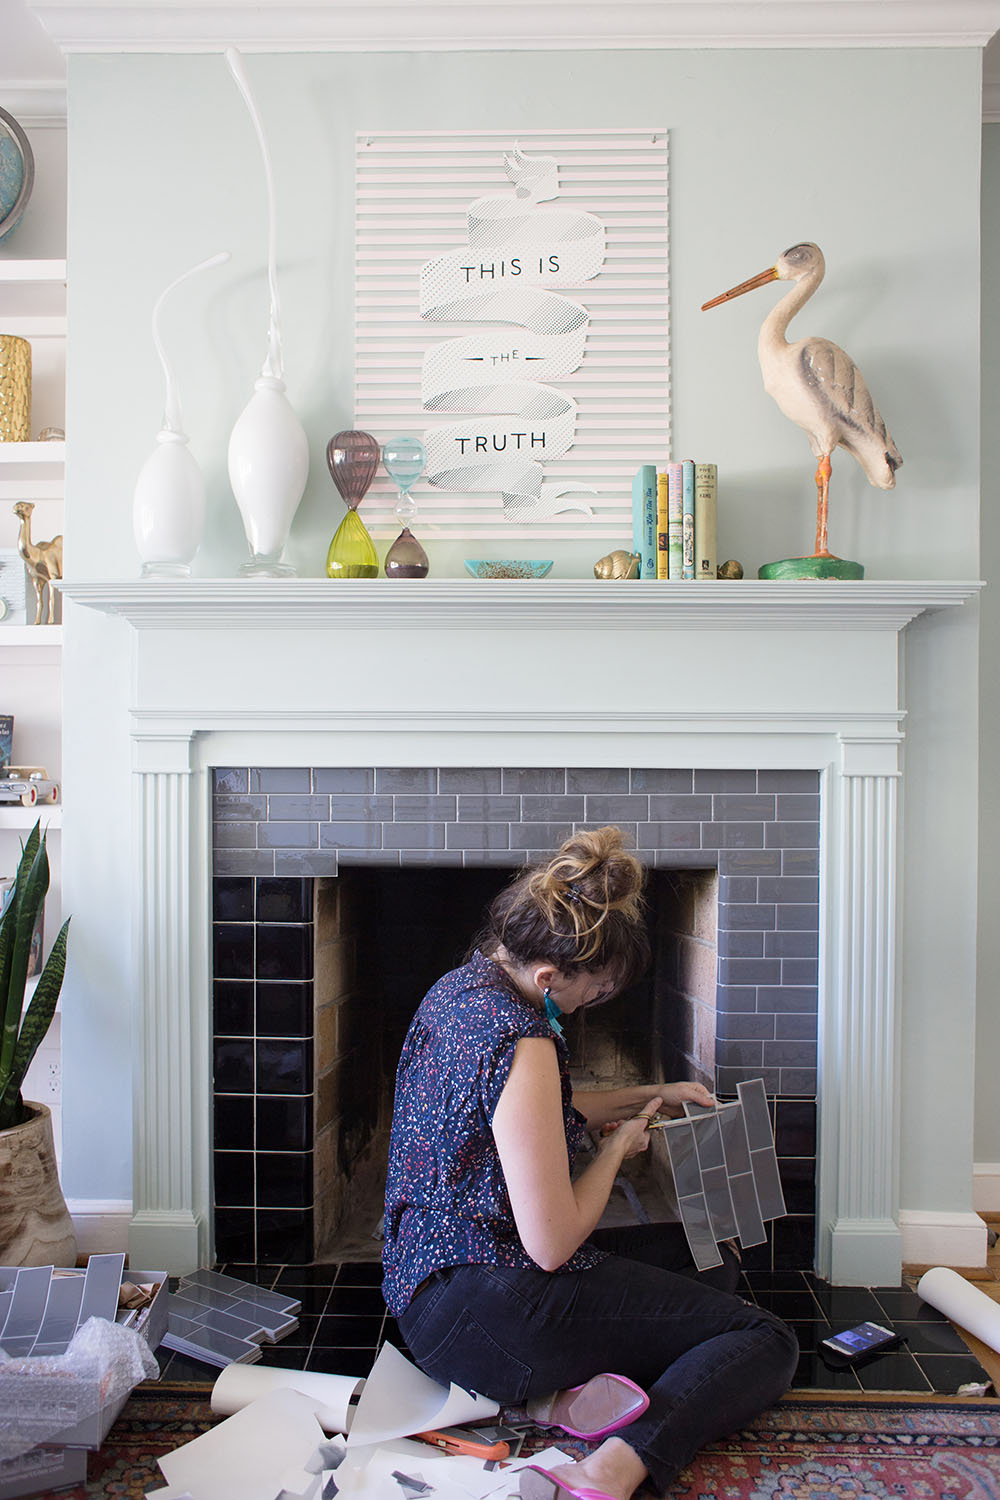 Diy Tile Fireplace Makeover, How To Redo Tile Around Fireplace